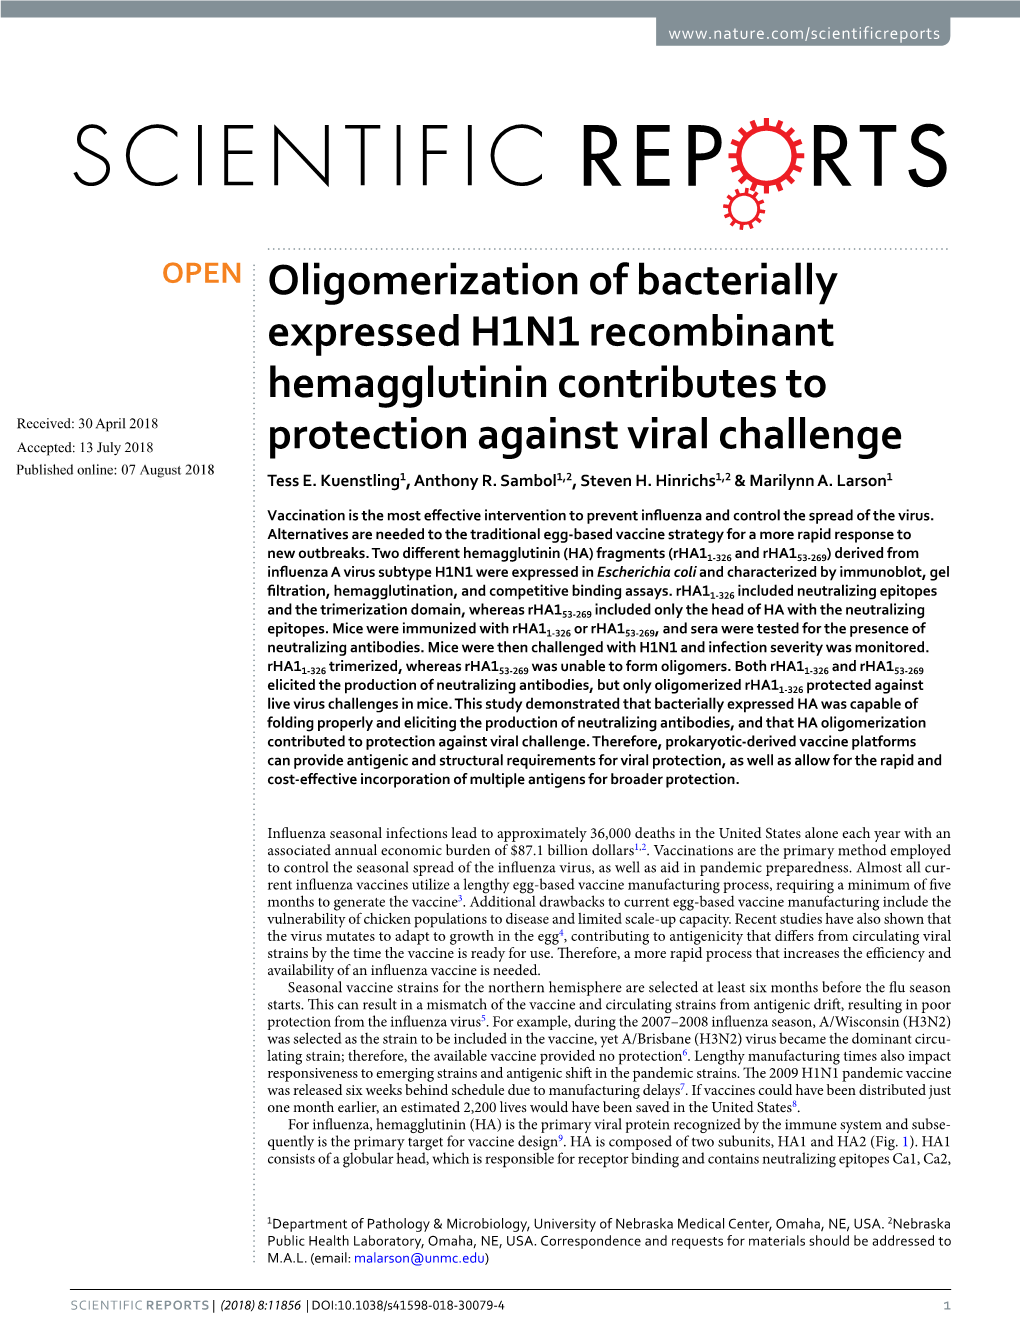 Oligomerization of Bacterially Expressed H1N1 Recombinant